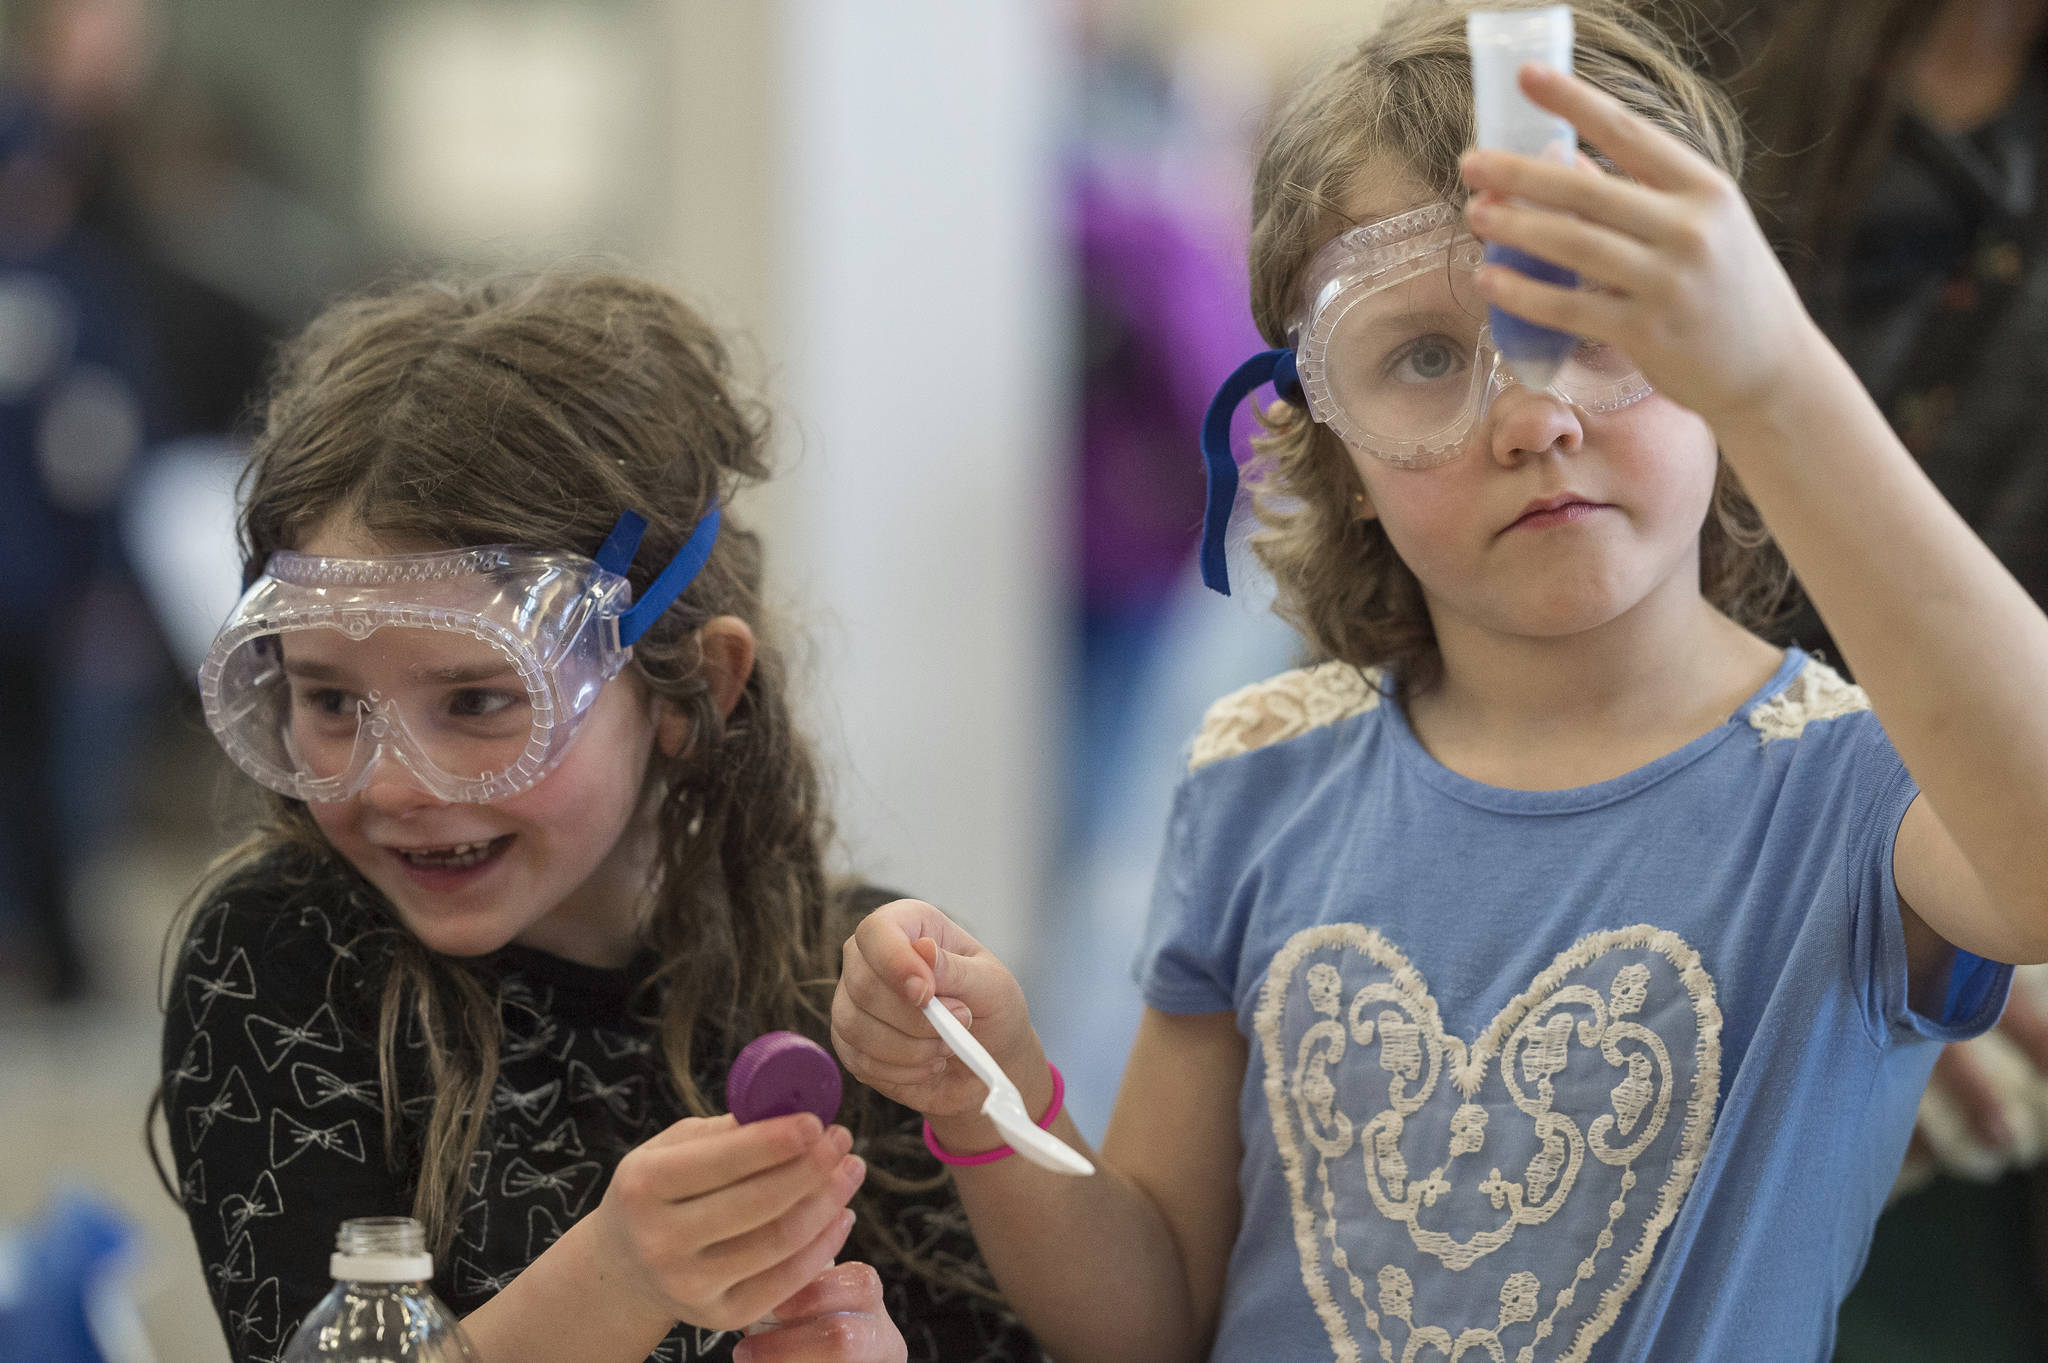 Madeline Branch, 6, left, and Millie Bass, 7, experiment with household products to learn about base and acid on the Ph scale during the Family STEM Night at Thunder Mountain High School on Wednesday, March 28, 2018. STEM Night was organized by Juneau STEM Coalition, Juneau School District Teachers and Juneau public librarians with help from many area organizations and individuals. (Michael Penn | Juneau Empire File)